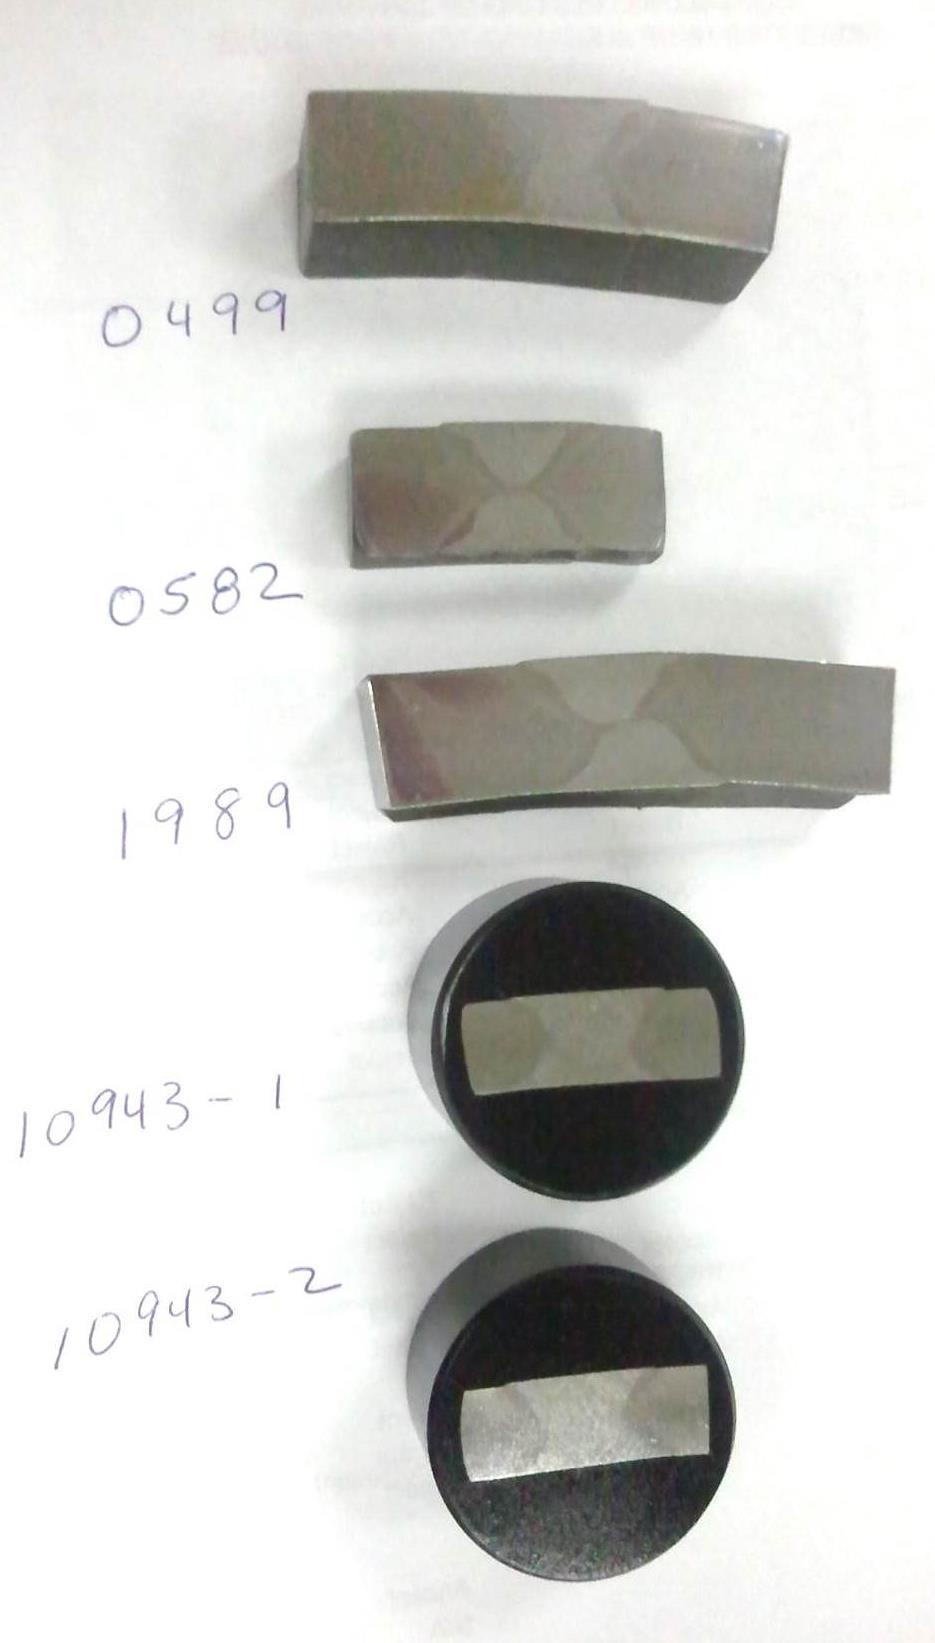 PHOTO MICROGRAPHS OF SECTIONED WELDS 0499 UT Accepted 0582 UT Rejected 1989 UT Rejected 10943-1 UT Accepted 10943-2 UT